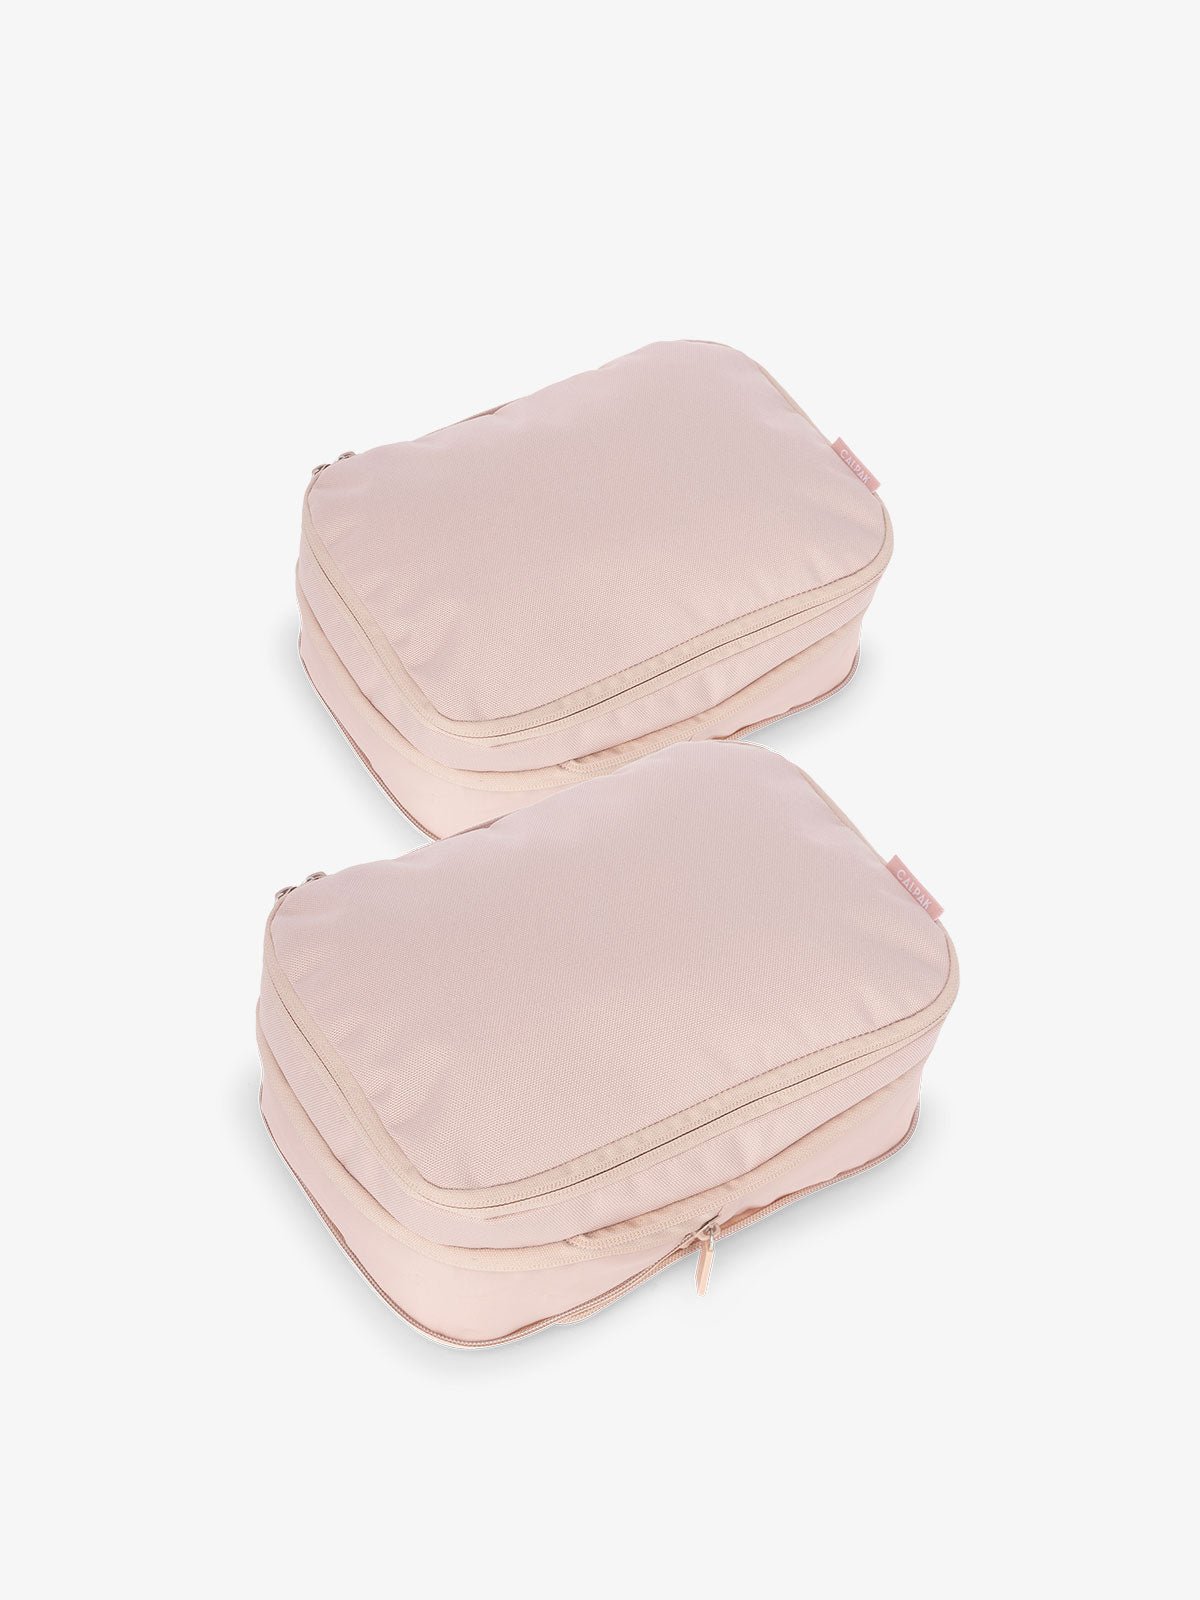 CALPAK small compression packing cubes with top handles and expandable by 4.5 inches in pink